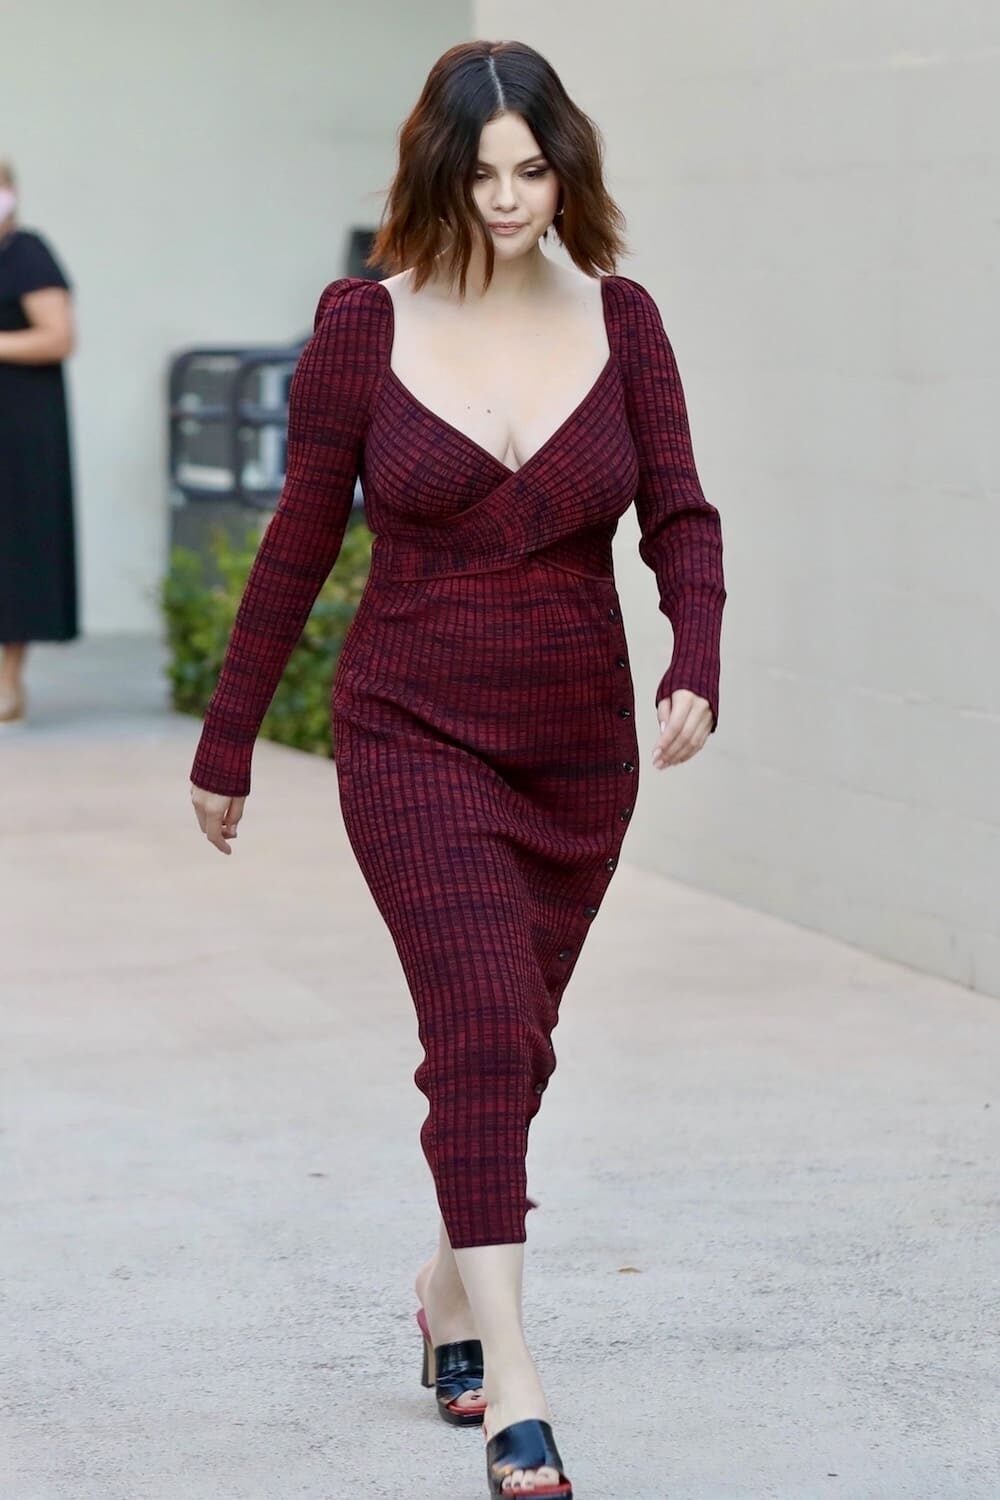 Radiant Selena Gomez Promoting ‘Only Murders in the Building’ in Los Angeles